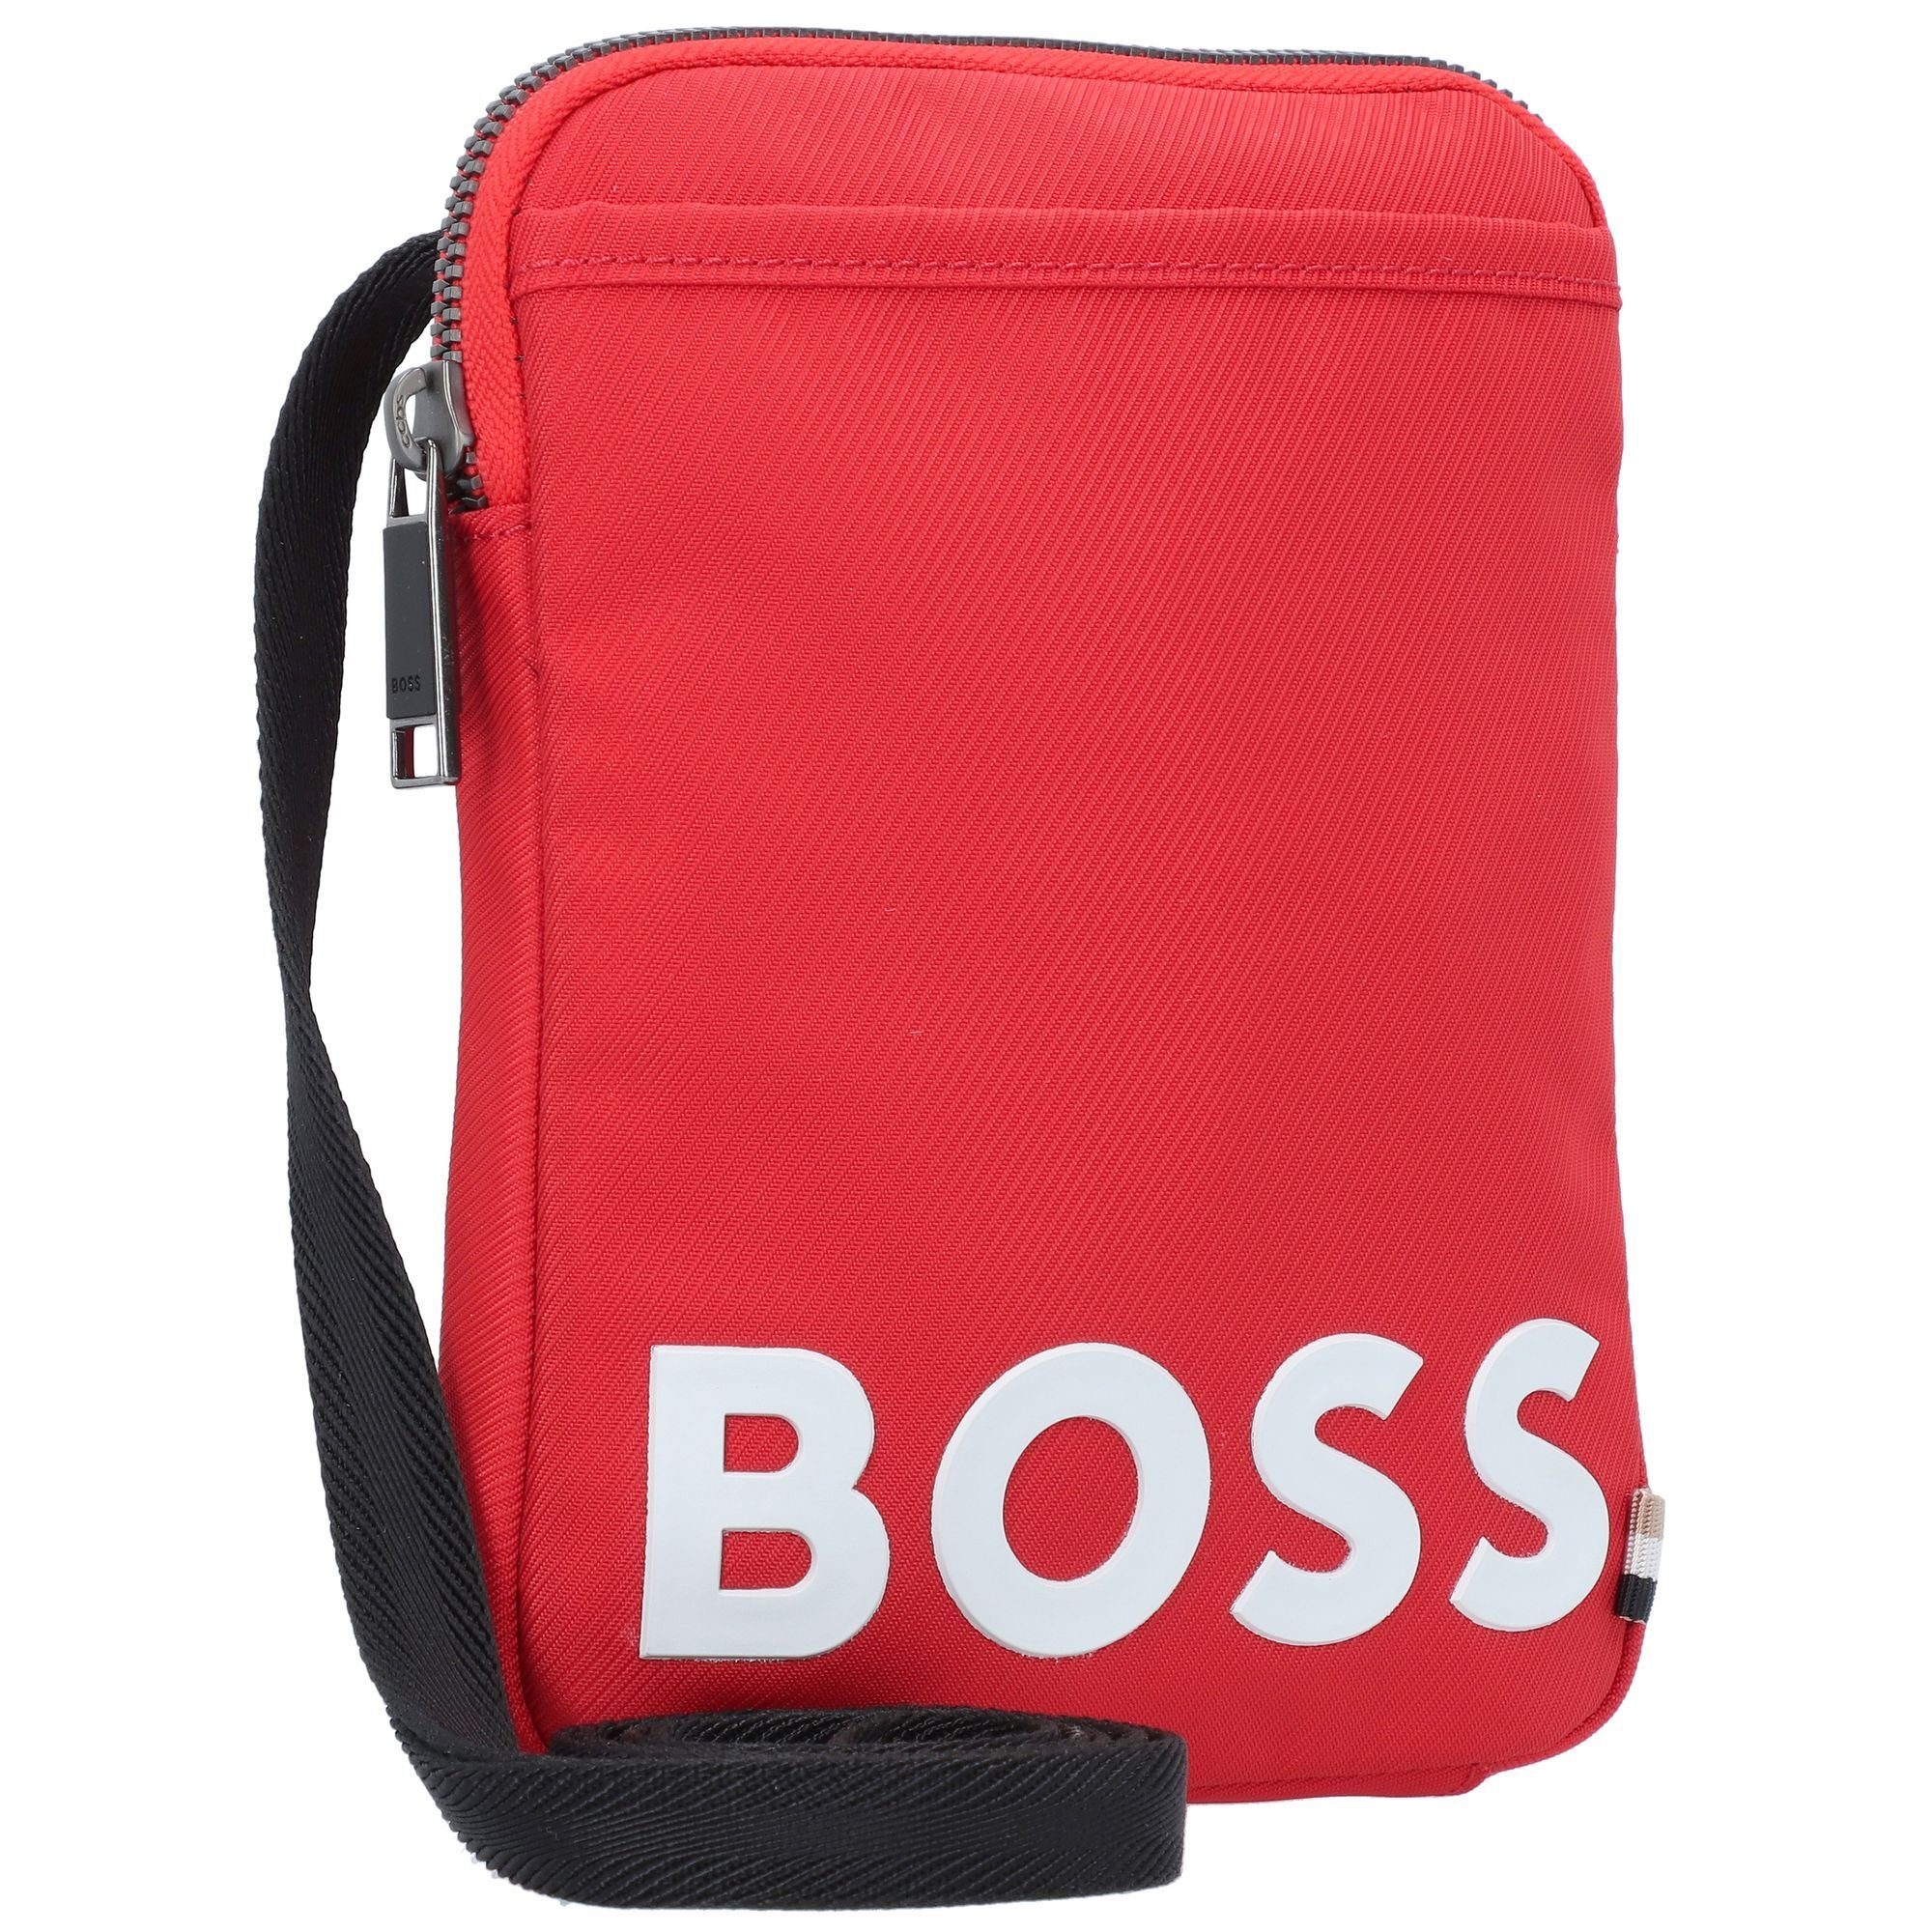 BOSS Smartphone-Hülle Catch 2.0, bright red-628 Polyester